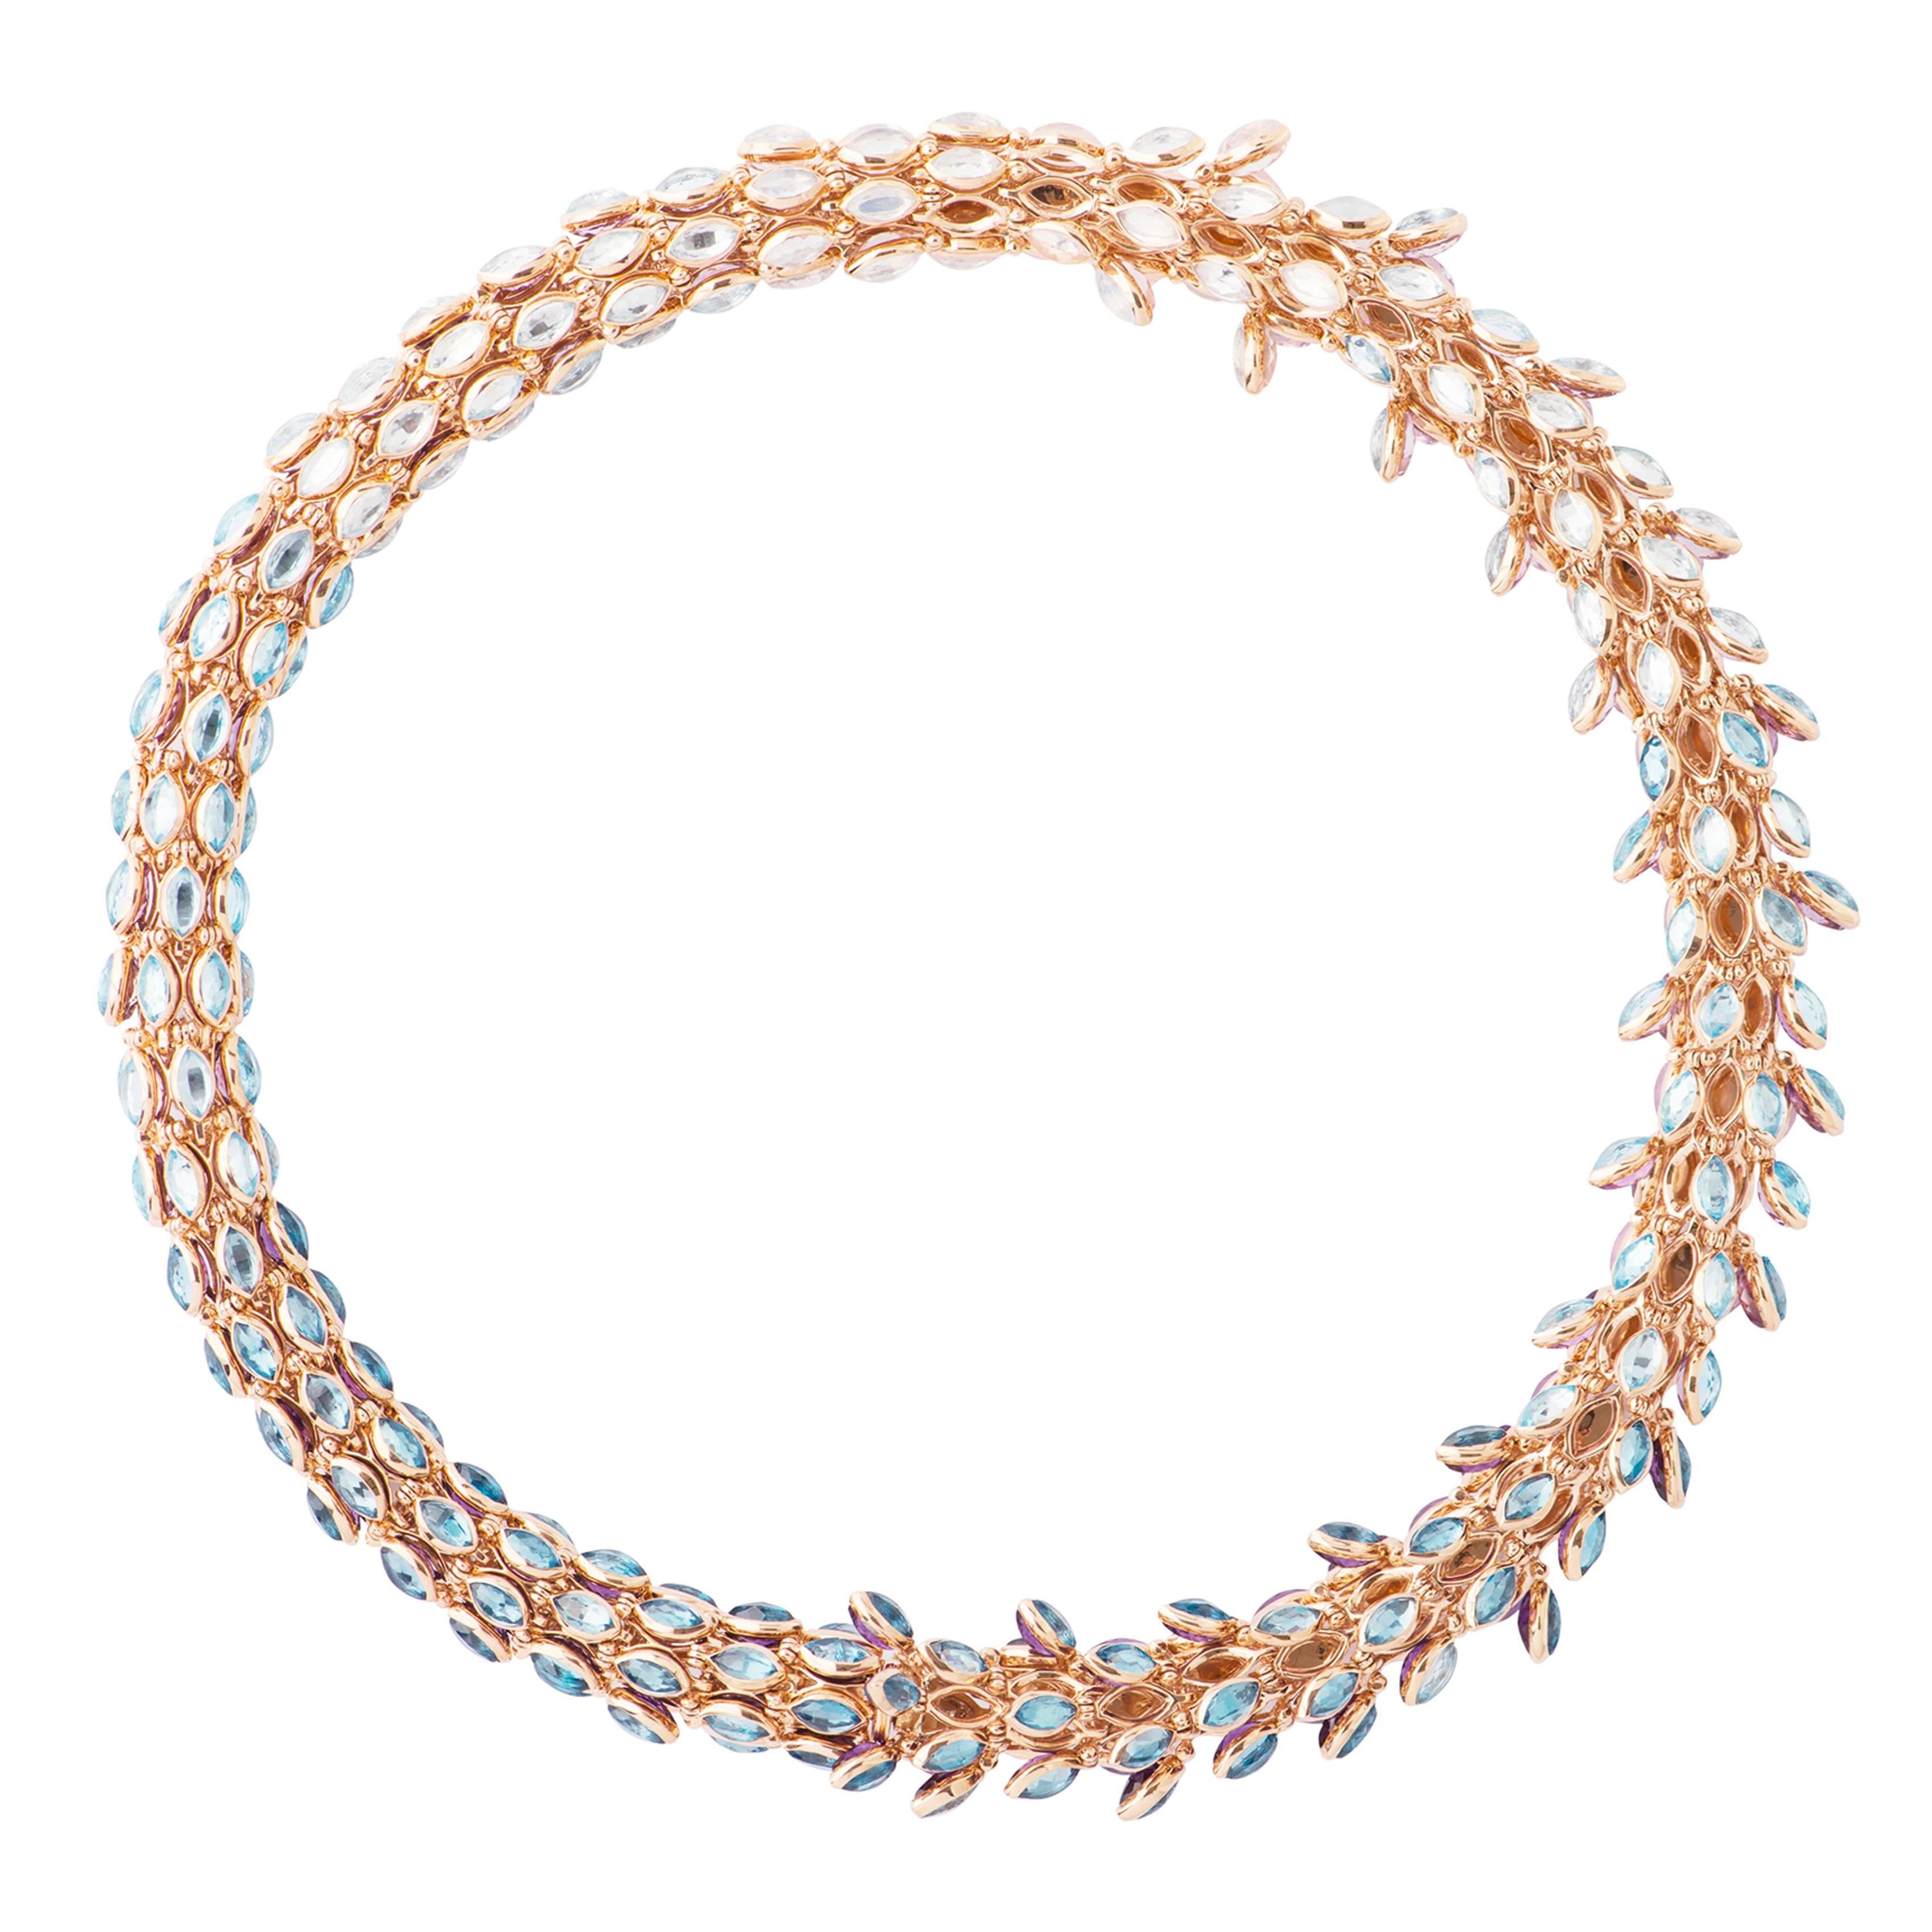 This Necklace is a High Jewelry piece from Marie Mas' Swinging Stones collection. 
This piece, stuns with innovative mechanisms and vibrant contrasting gemstones. The necklace is entirely articulated. Every articulated element has two stones set